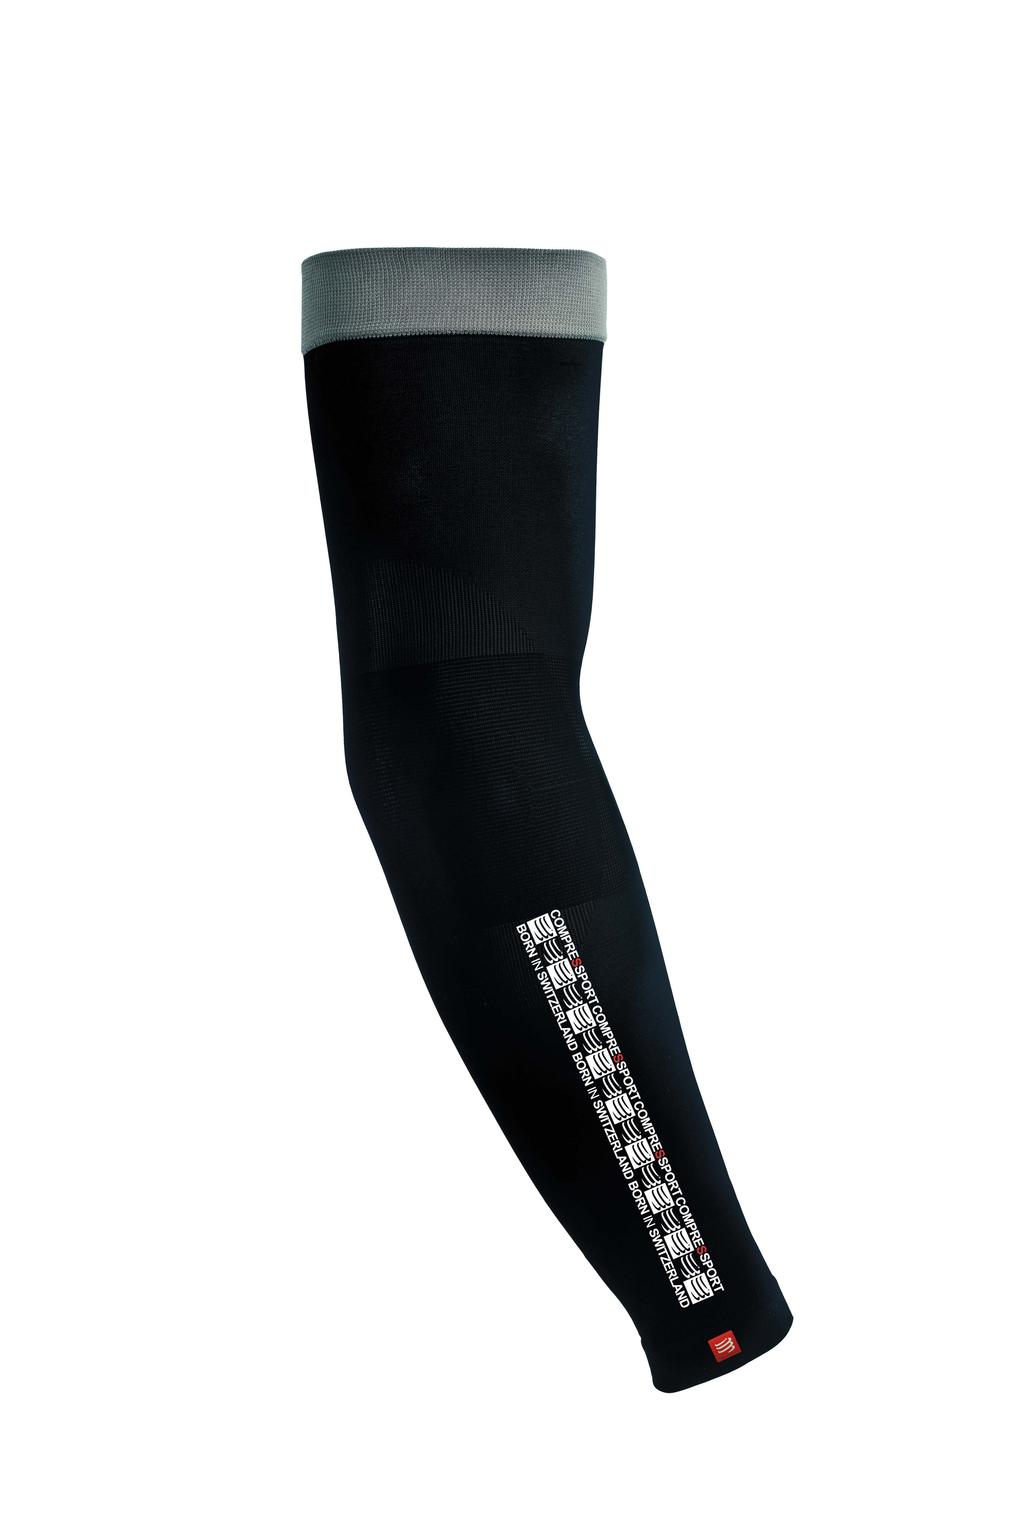 E AS ERY PRESSRFEEBRLUA 2013 ARMFORCE Armsleeves Colours :Black / White Sizes : 1-2-3-4 Recommended retail price = 29 PRORACING ARMSLEEVE Colours : Black / White Sizes : 1-2-3-4 Recommended retail